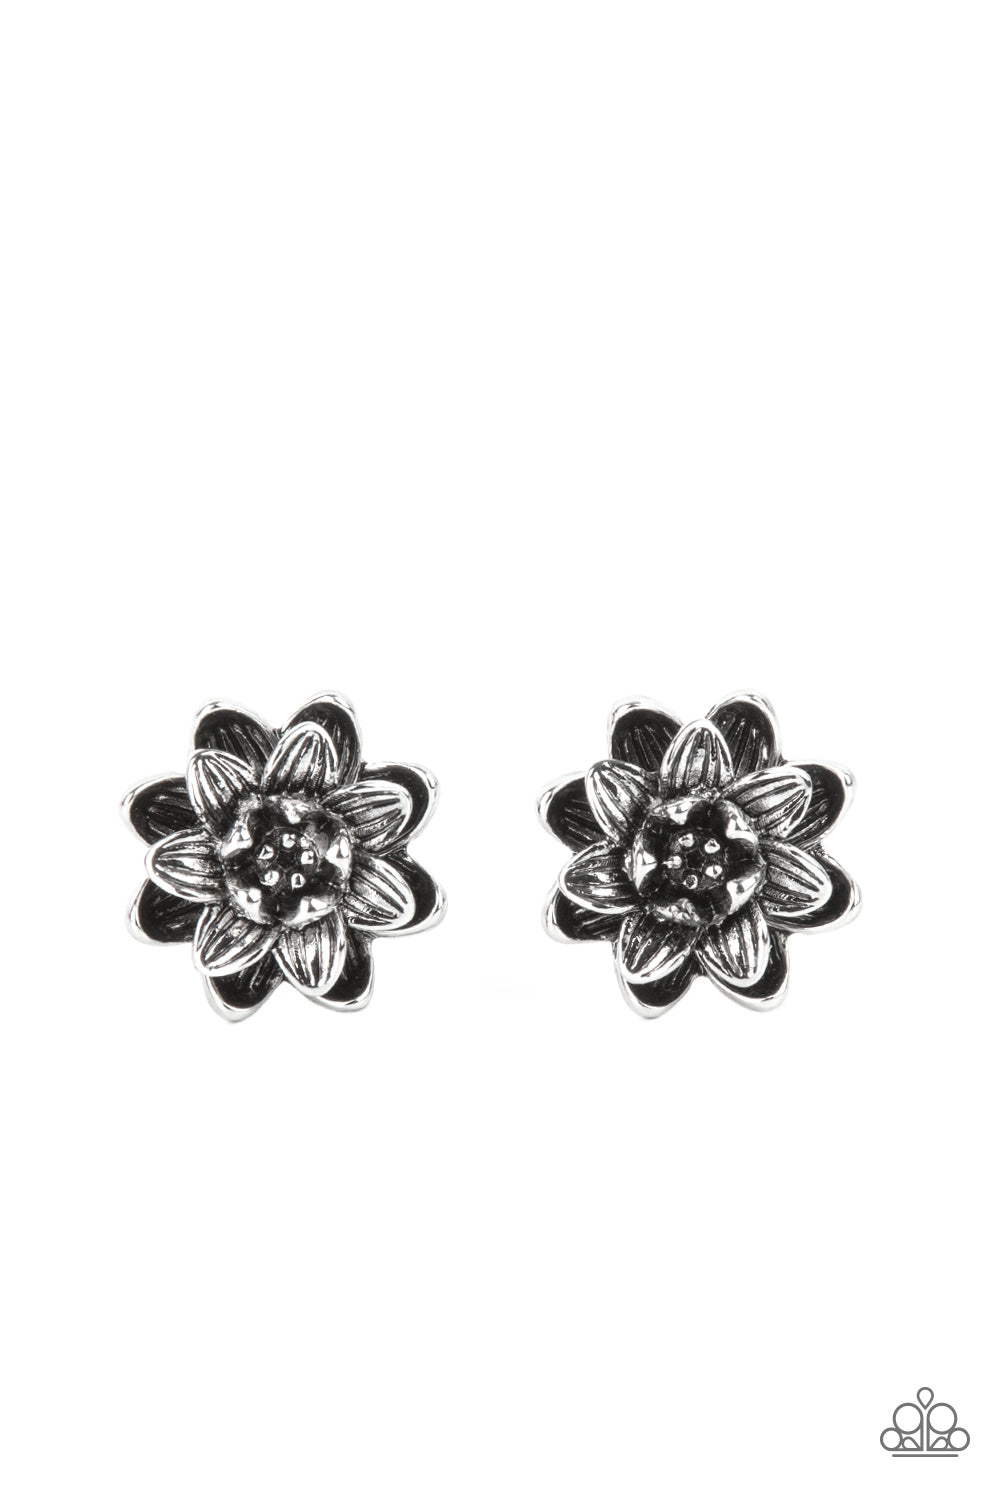 oak-sisters-jewelry-water-lily-love-silver-post earrings-paparazzi-accessories-by-lisa